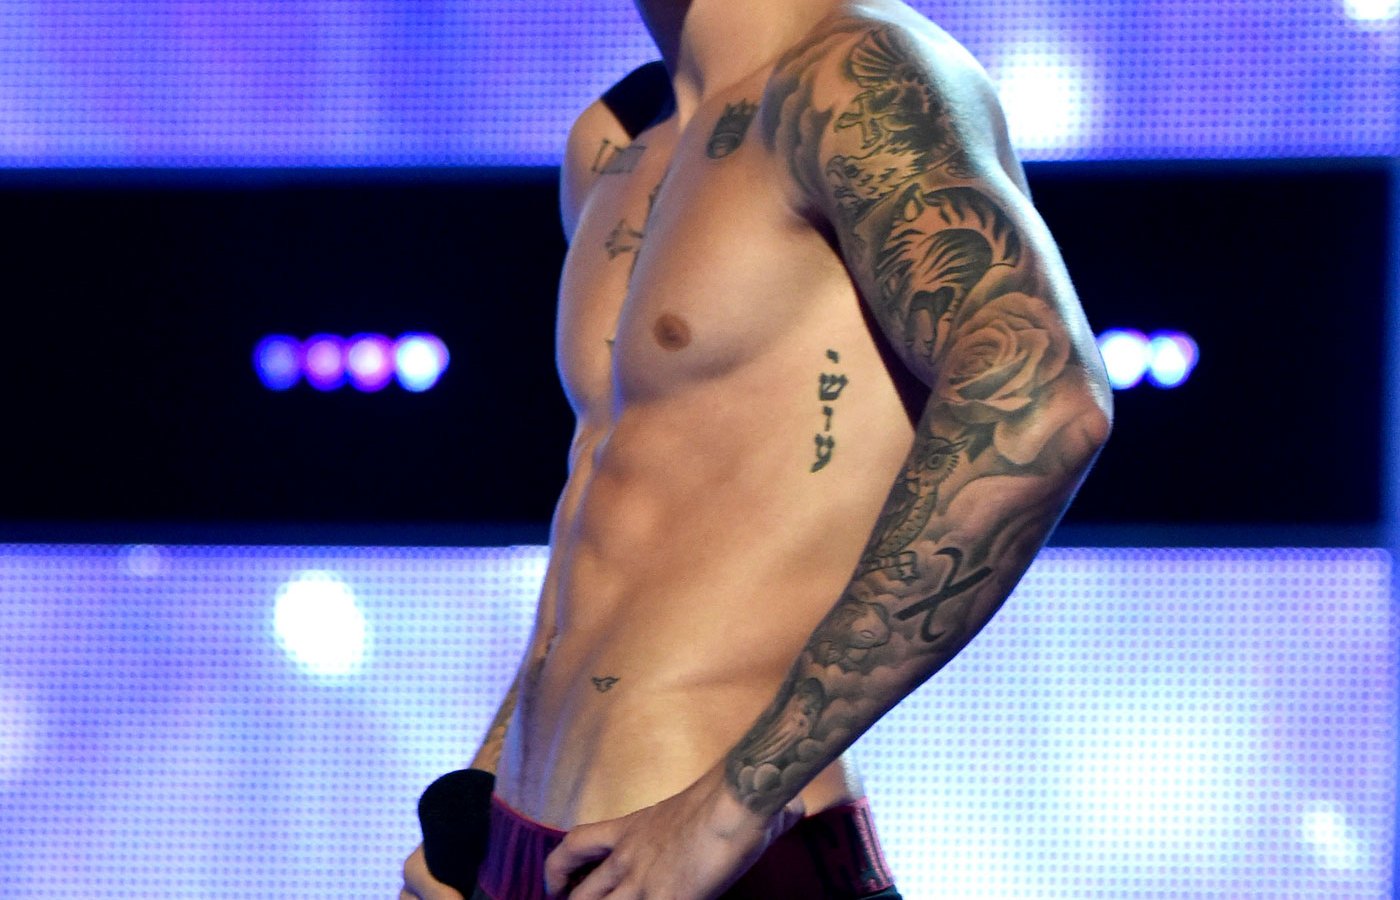 Justin Bieber stripped to his underwear at Fashion Rocks during NYFW